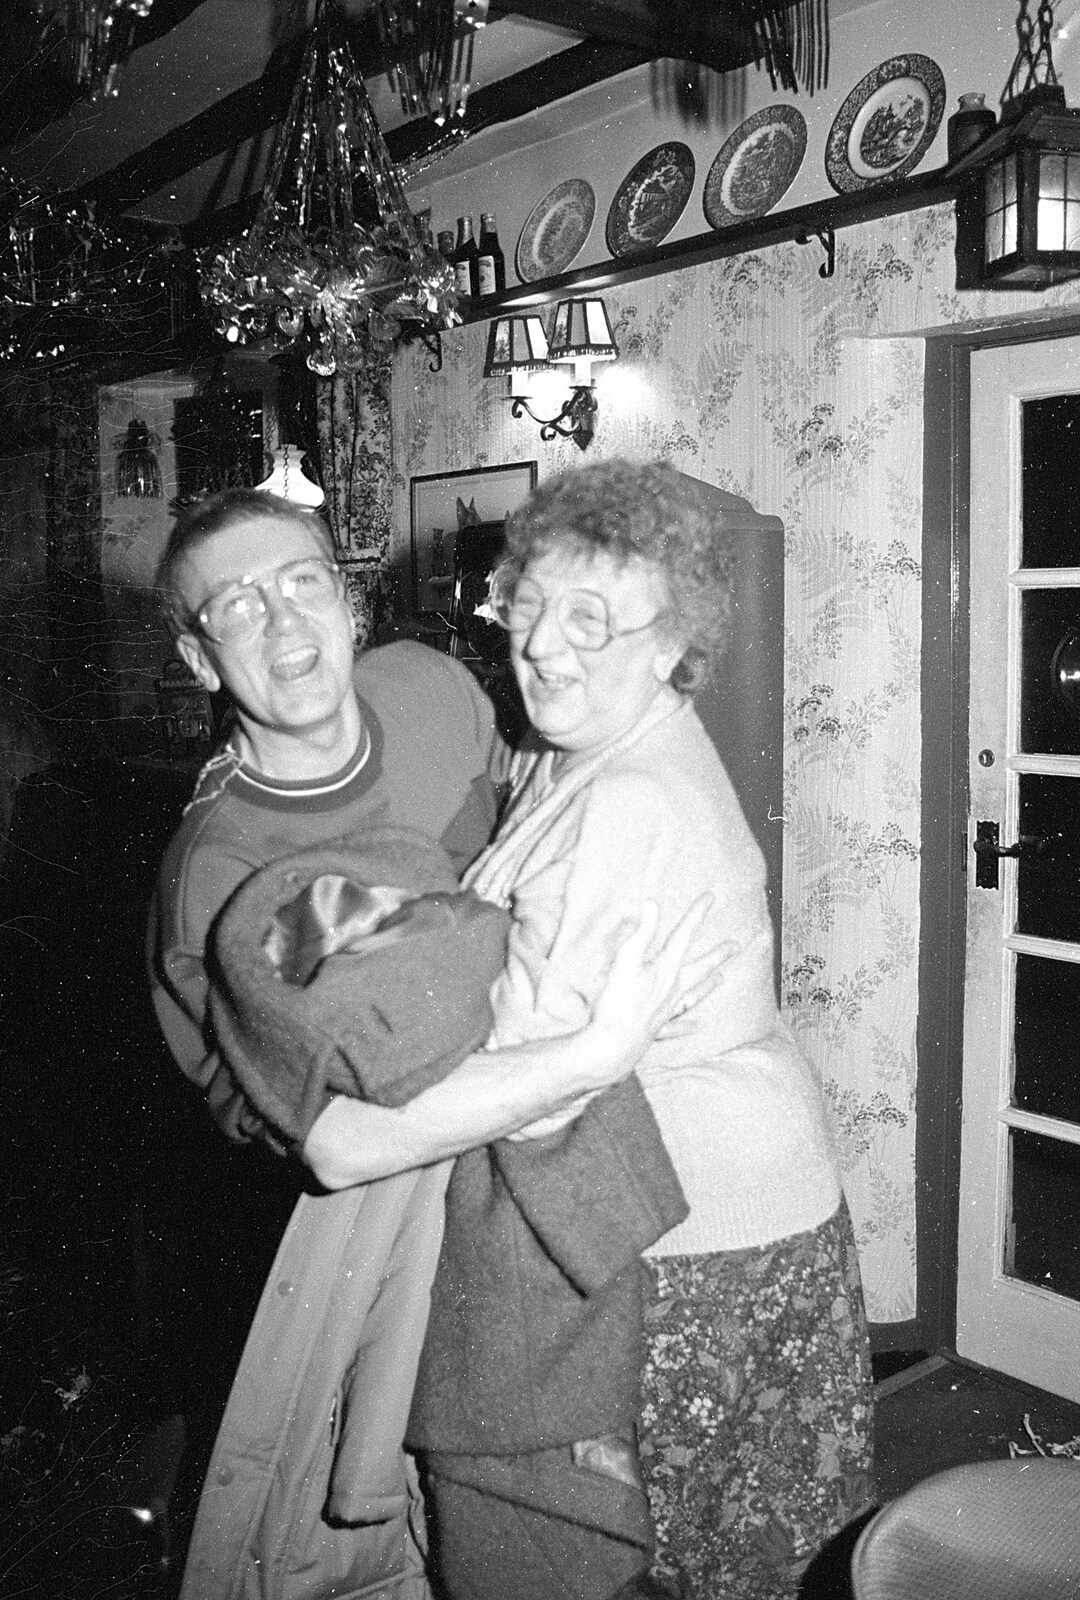 John Willy tries to stop Arline escaping from New Year's Eve at the Swan Inn, Brome, Suffolk - 31st December 1992